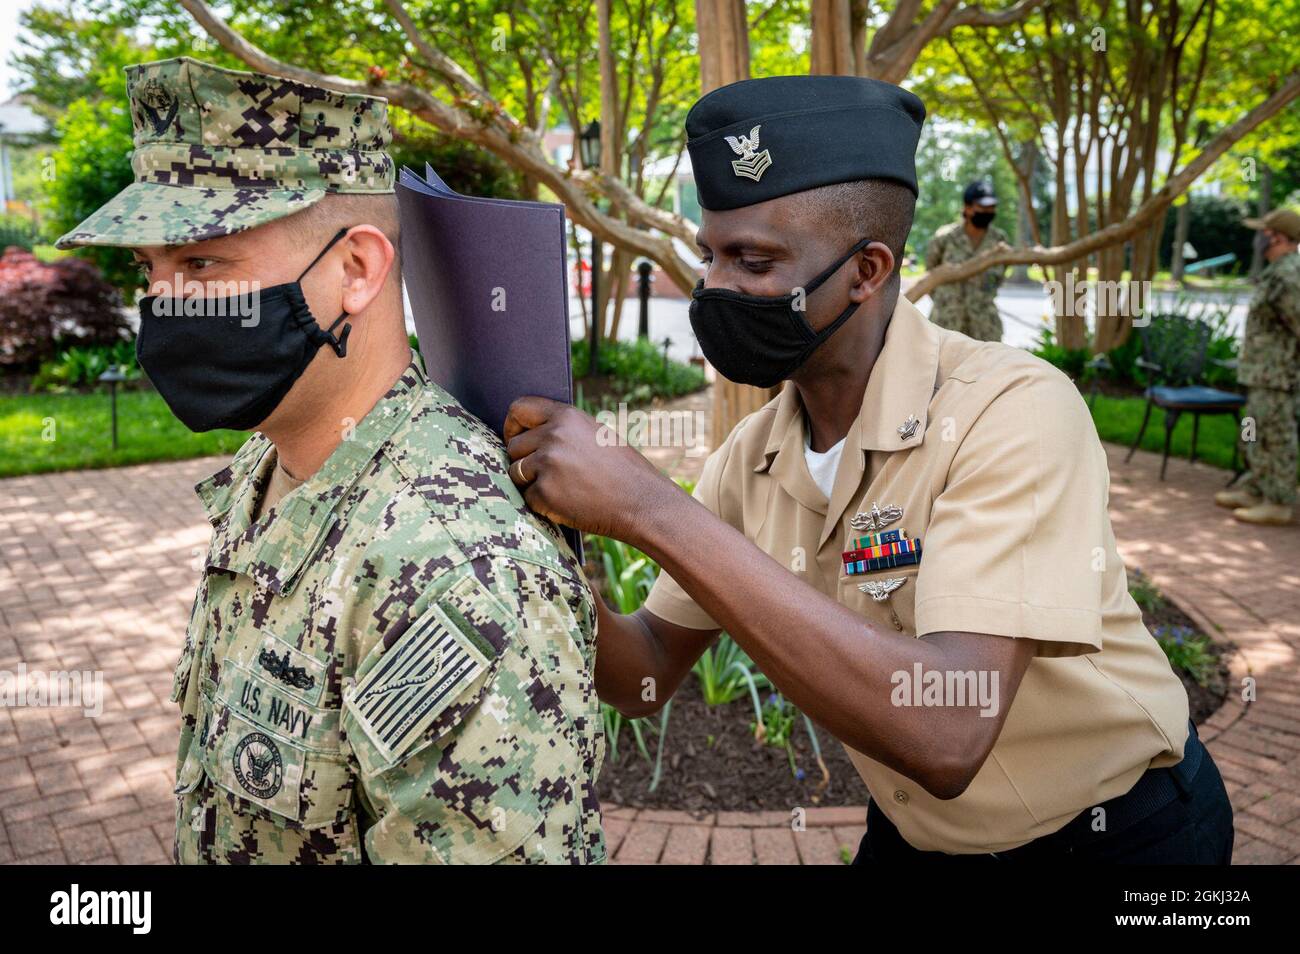 WASHINGTON, DC (April 28, 2021) – Culinary Specialist 1st Class Gideon Ige signs paperwork following a reenlistment ceremony held onboard Washington Navy Yard. Stock Photo